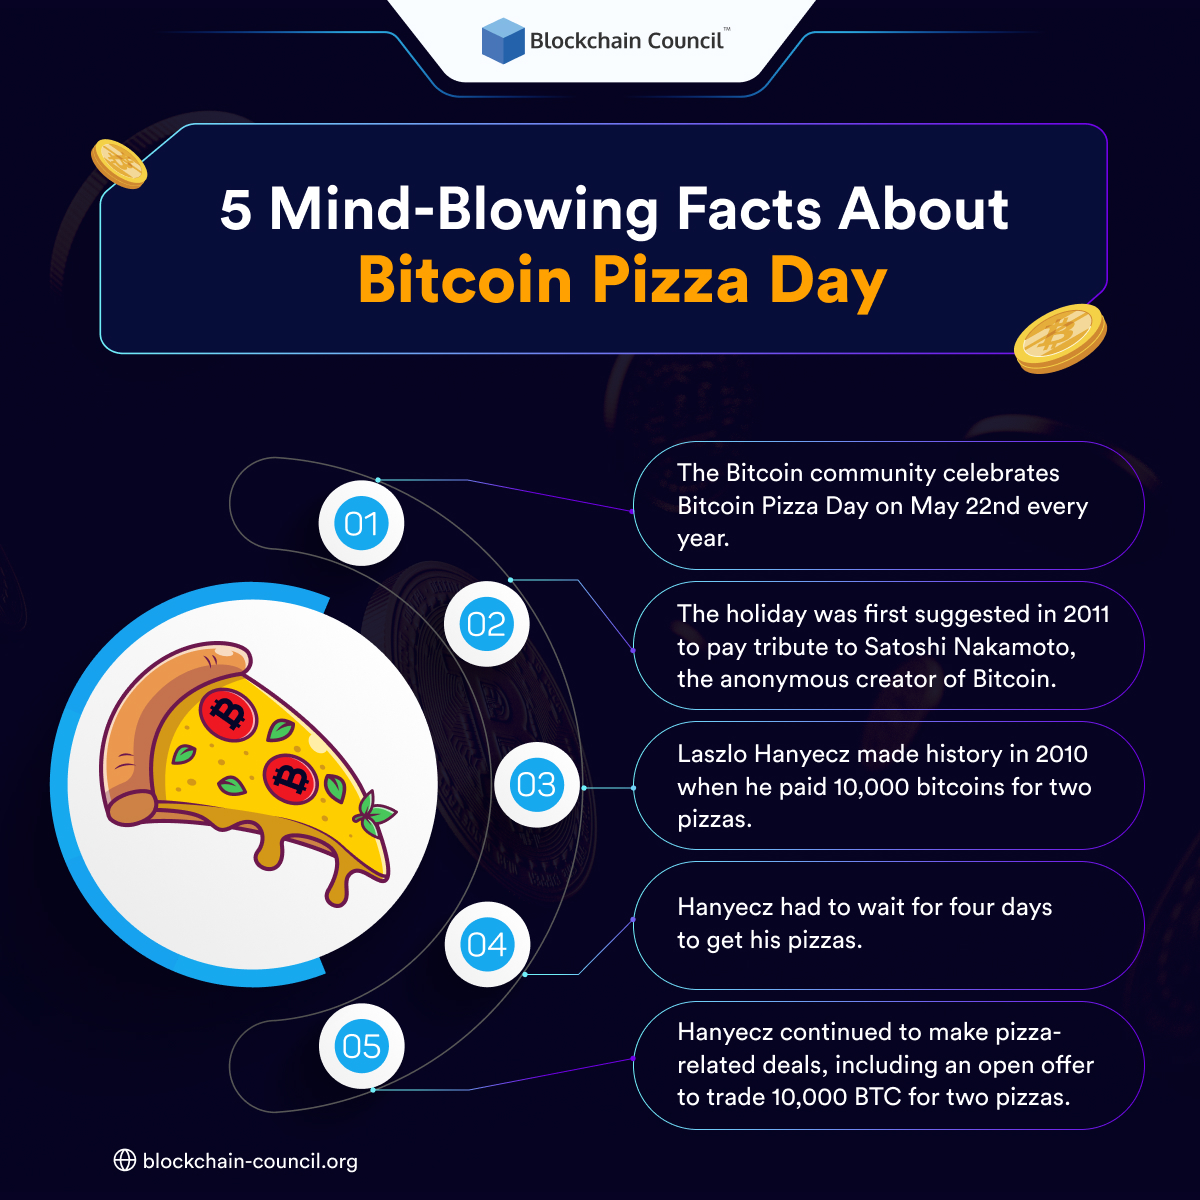 5 Mind-Blowing Facts About Bitcoin Pizza Day